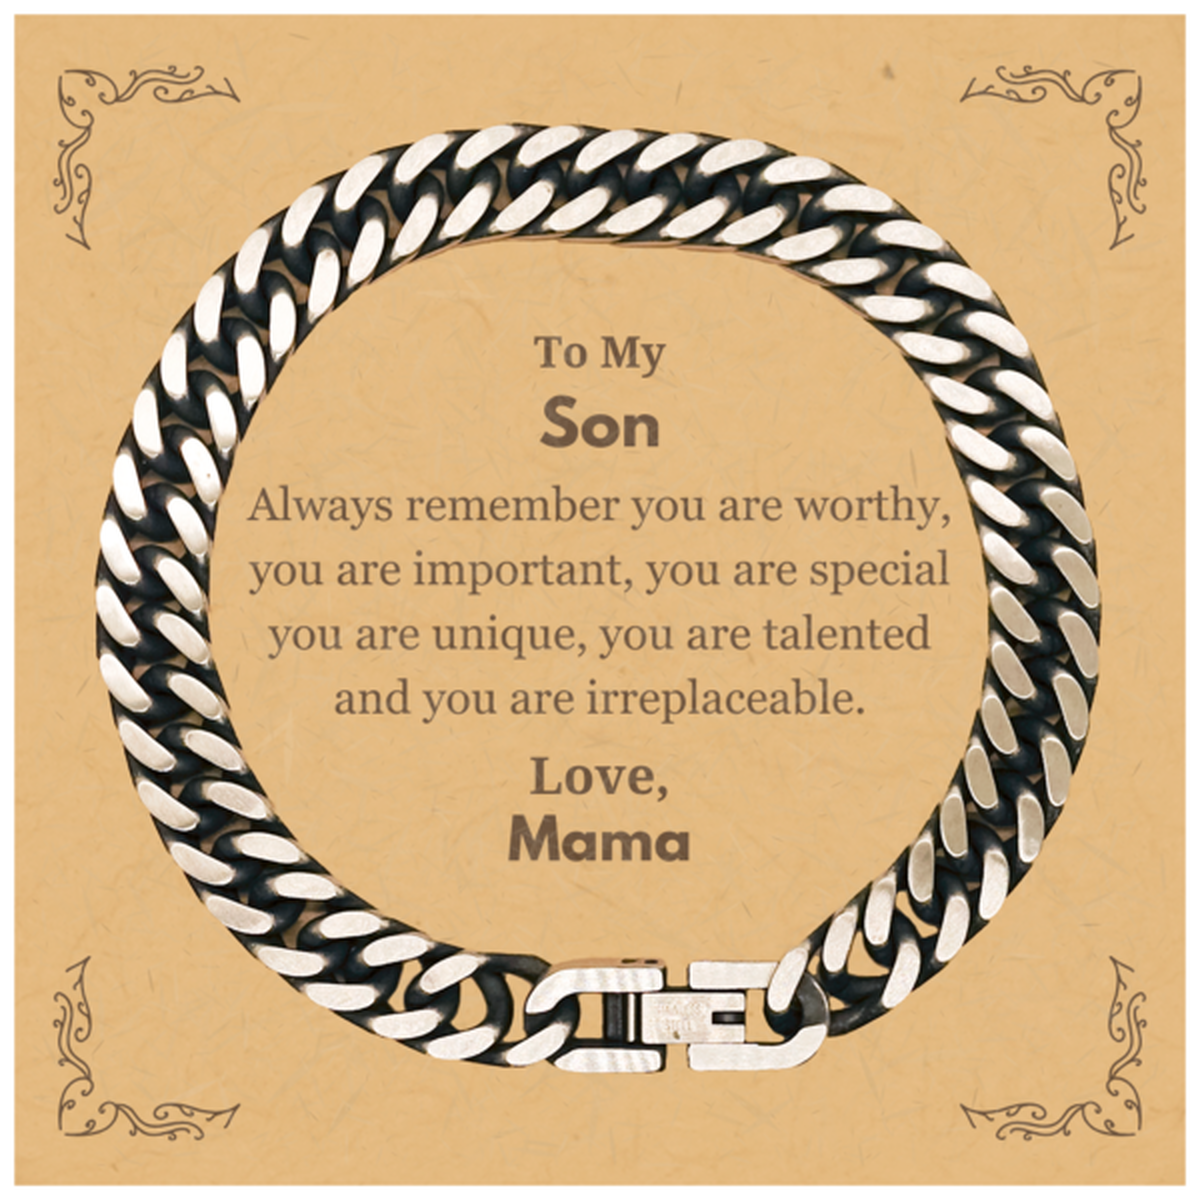 Son Birthday Gifts from Mama, Inspirational Cuban Link Chain Bracelet for Son Christmas Graduation Gifts for Son Always remember you are worthy, you are important. Love, Mama